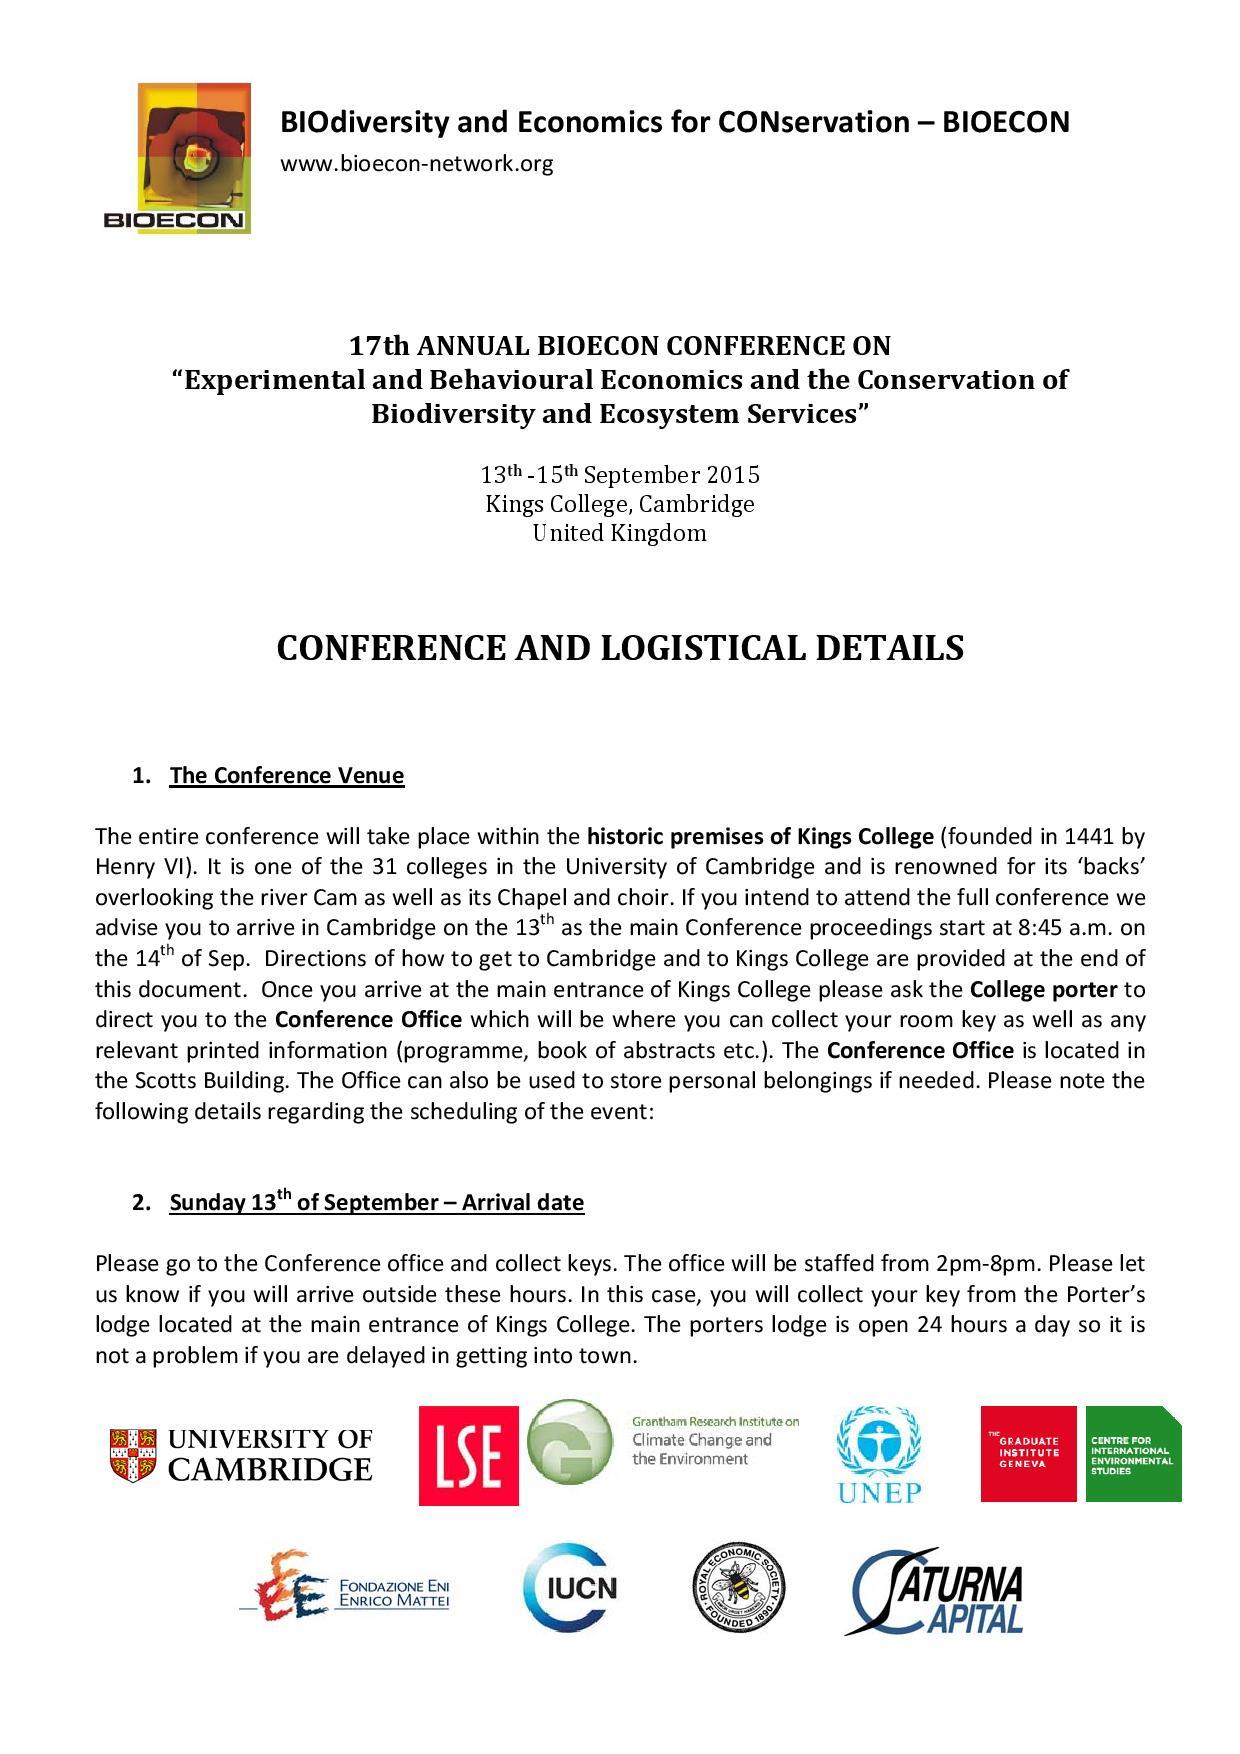 17th ANNUAL BIOECON CONFERENCE ON "Experimental and Behavioural Economics and the Conservation of Biodiversity and Ecosystem Services"